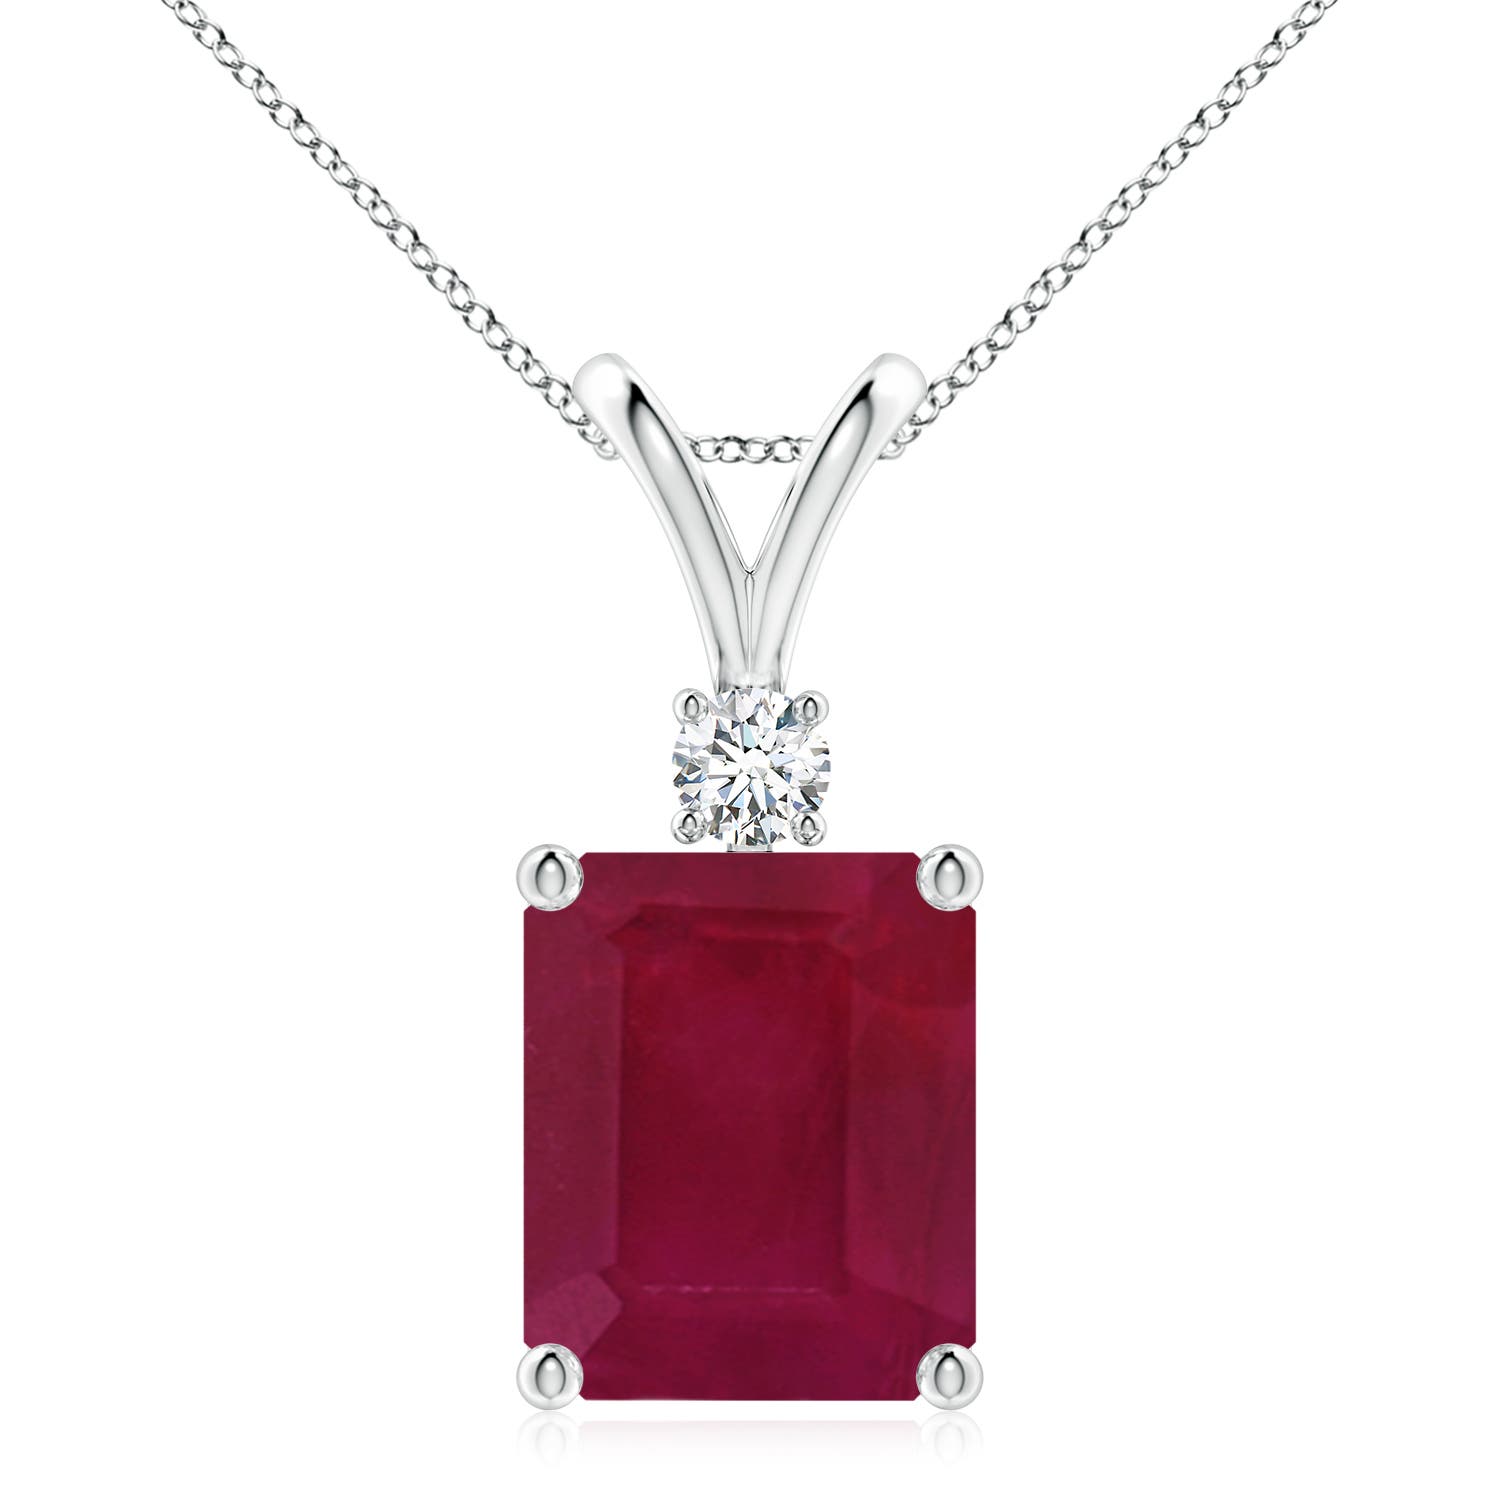 A - Ruby / 6.41 CT / 14 KT White Gold